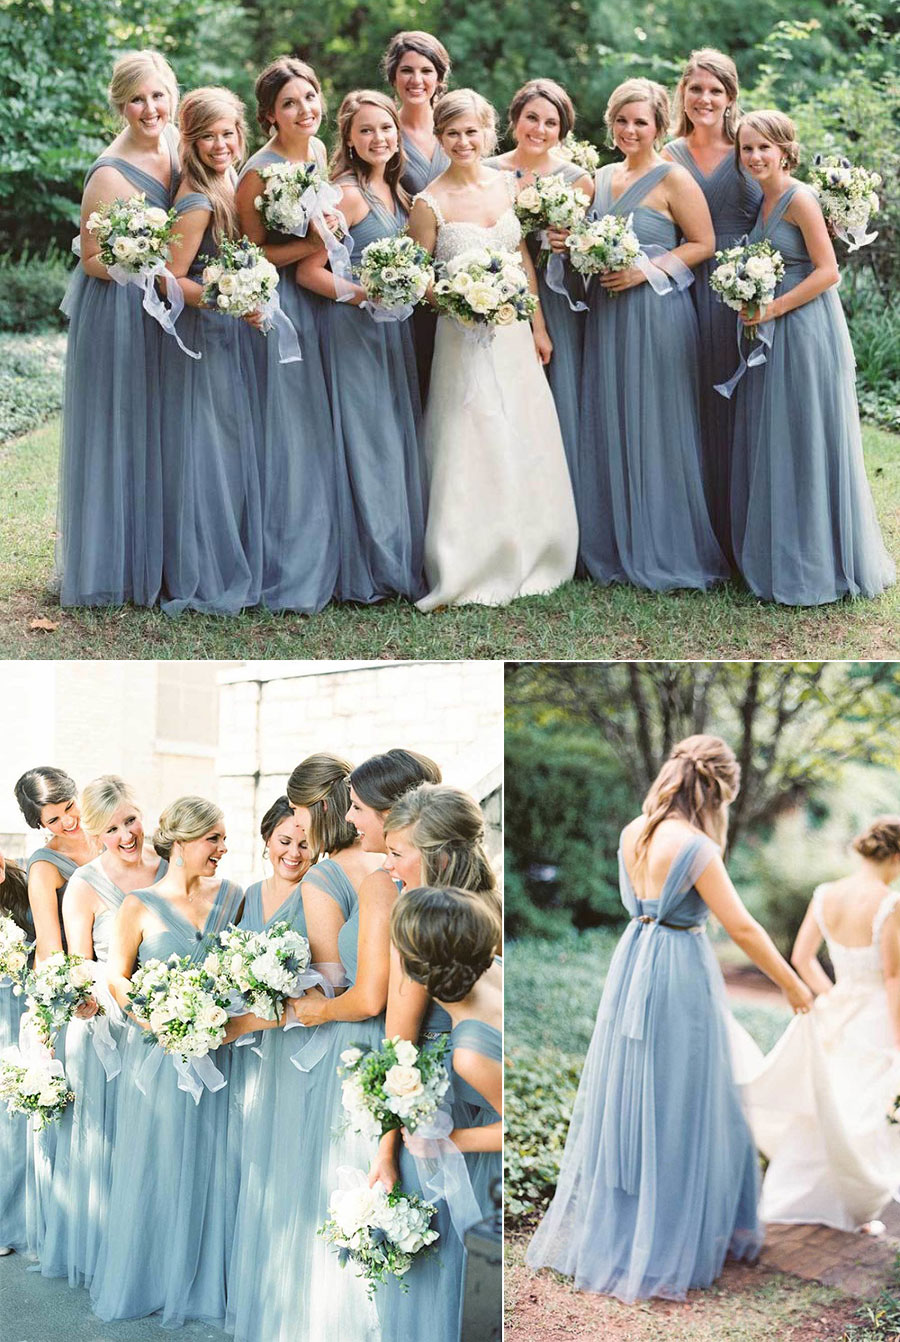 10 bridesmaids outfit ideas to make your wedding day picture perfect -  WeddingSutra